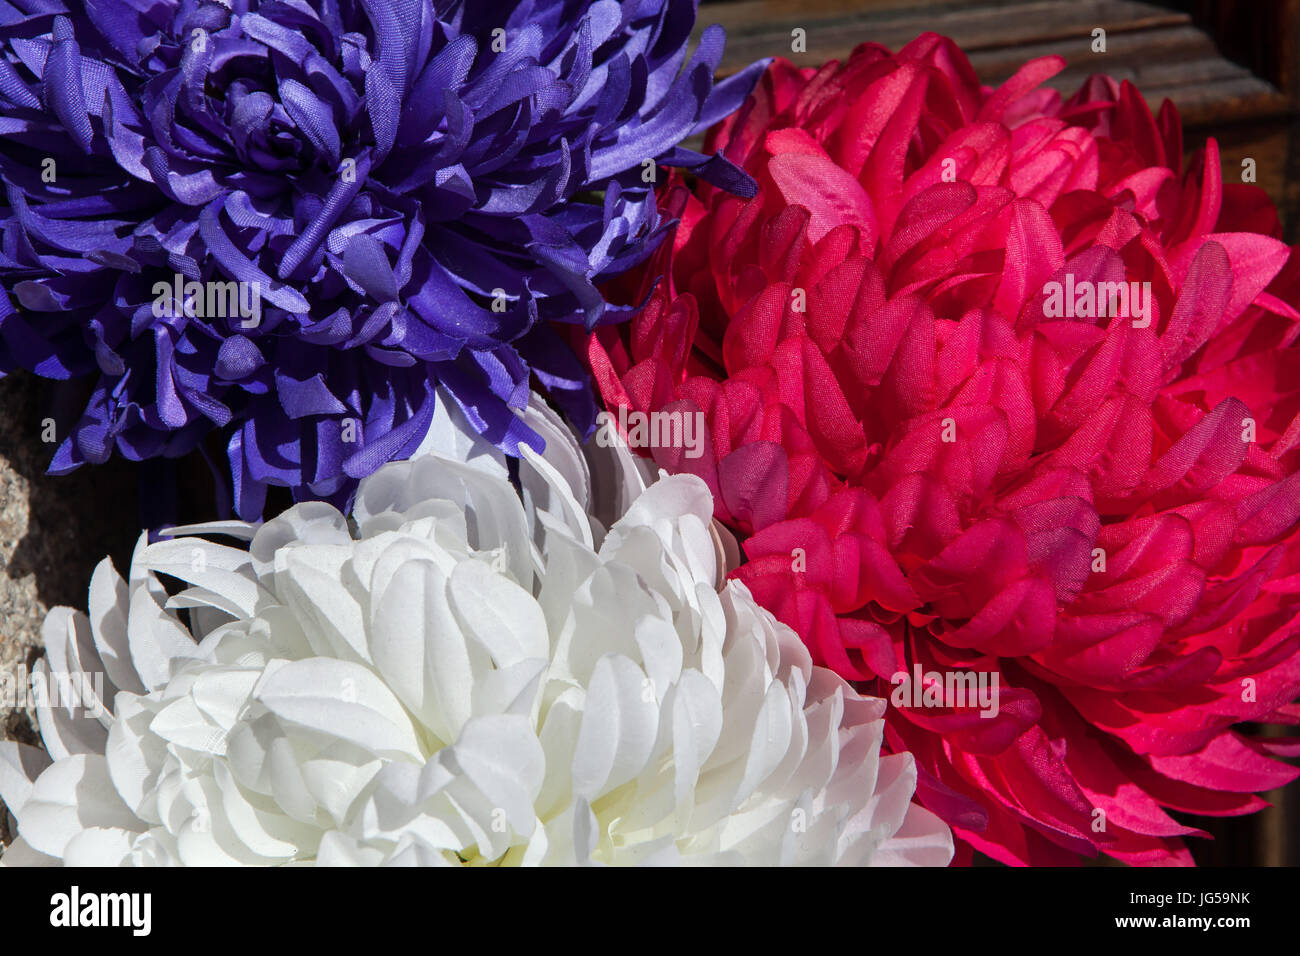 Red, blue and white plastic flowers (Callistephus chinensis). Stock Photo